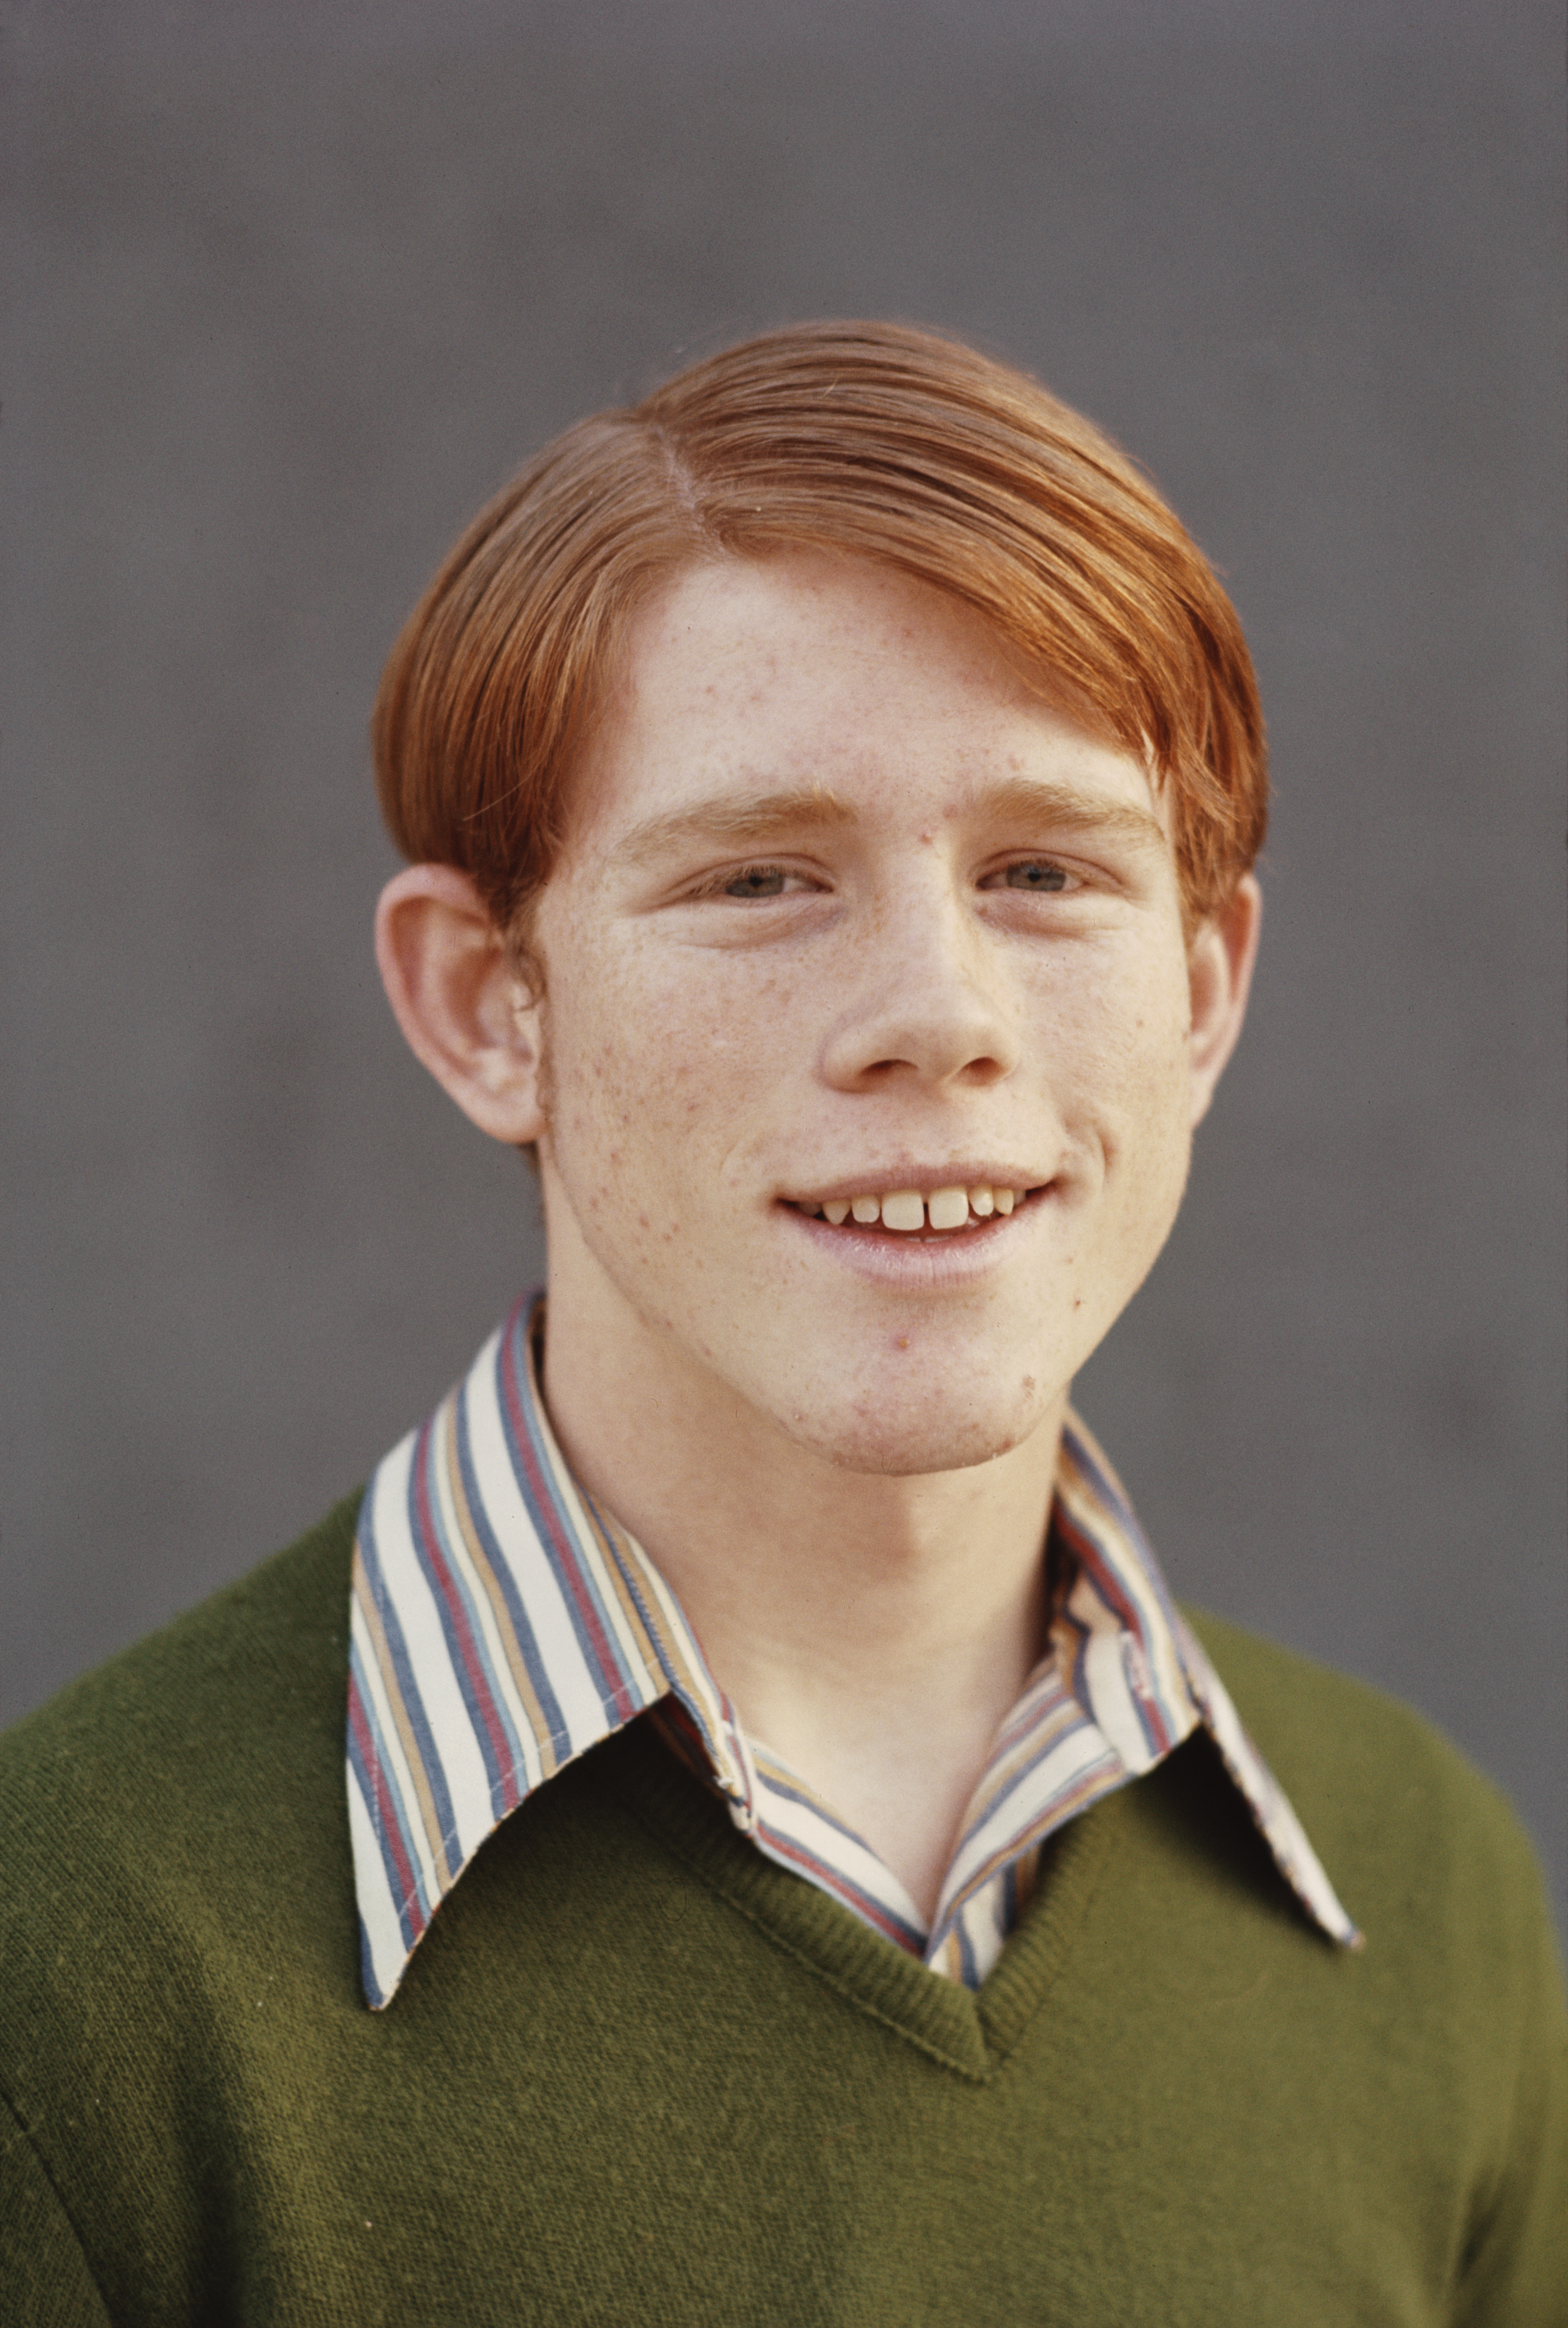 Ron Howard on January 1, 1971 | Source: Getty Images